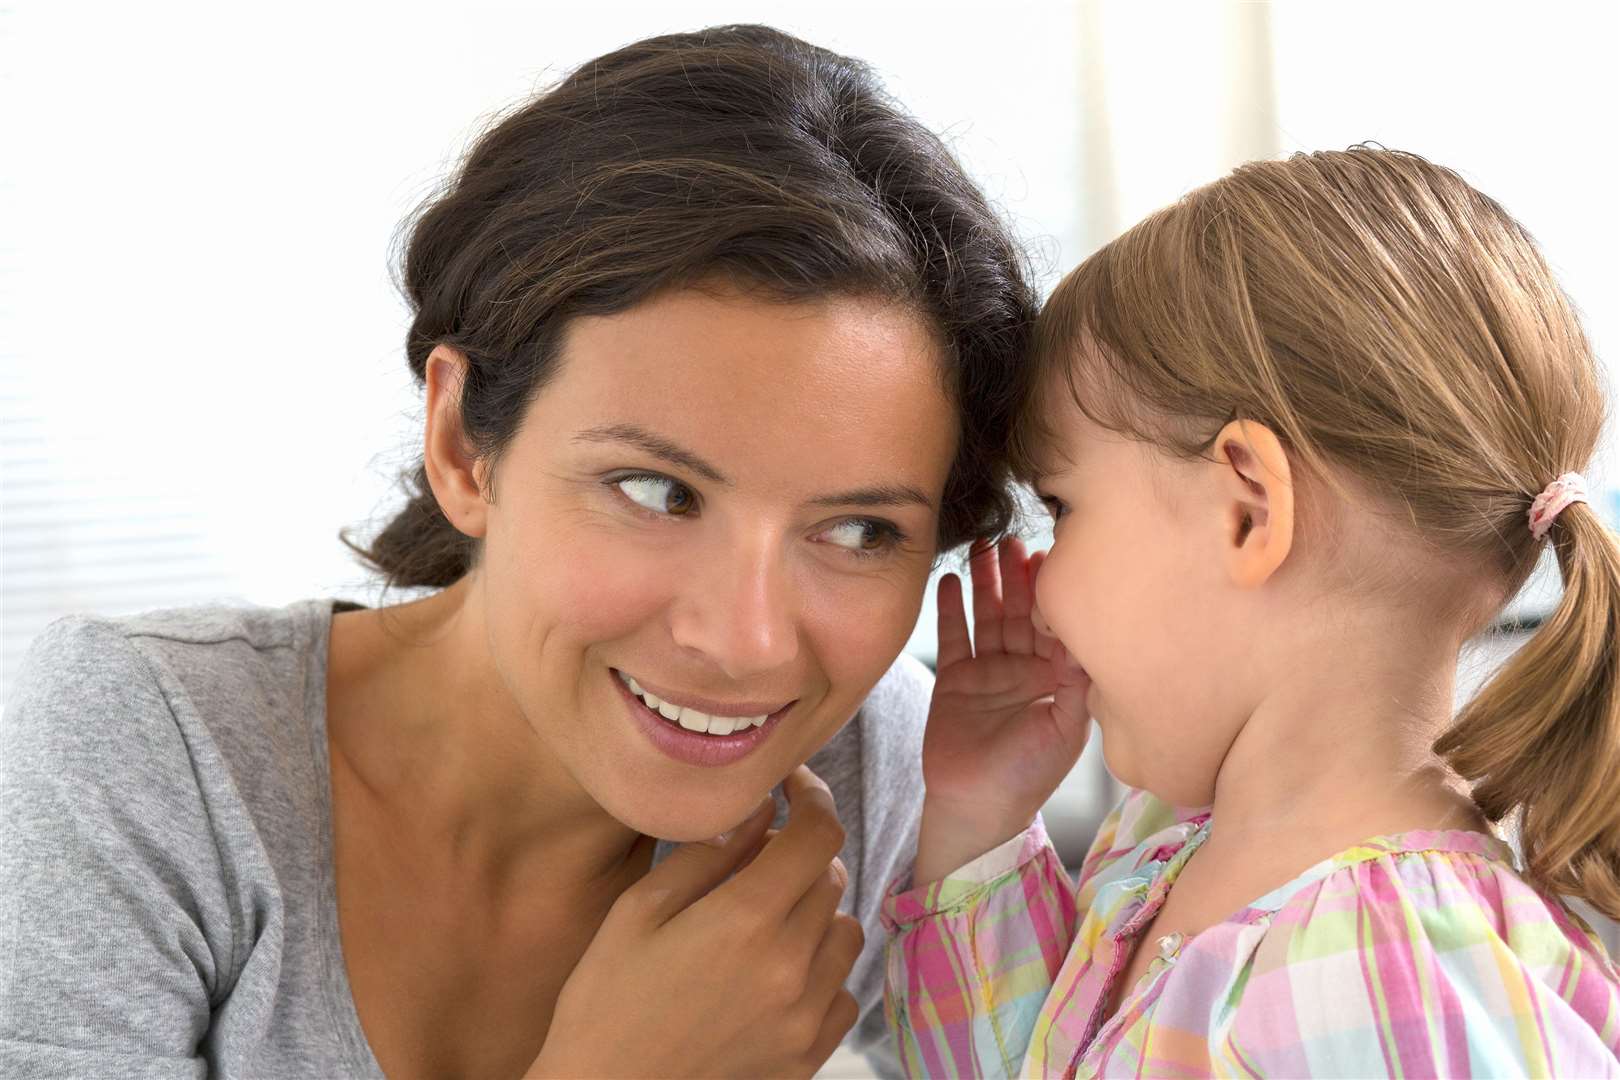 A good tip is for parents to adopt a tone of voice which suggests you're in this together